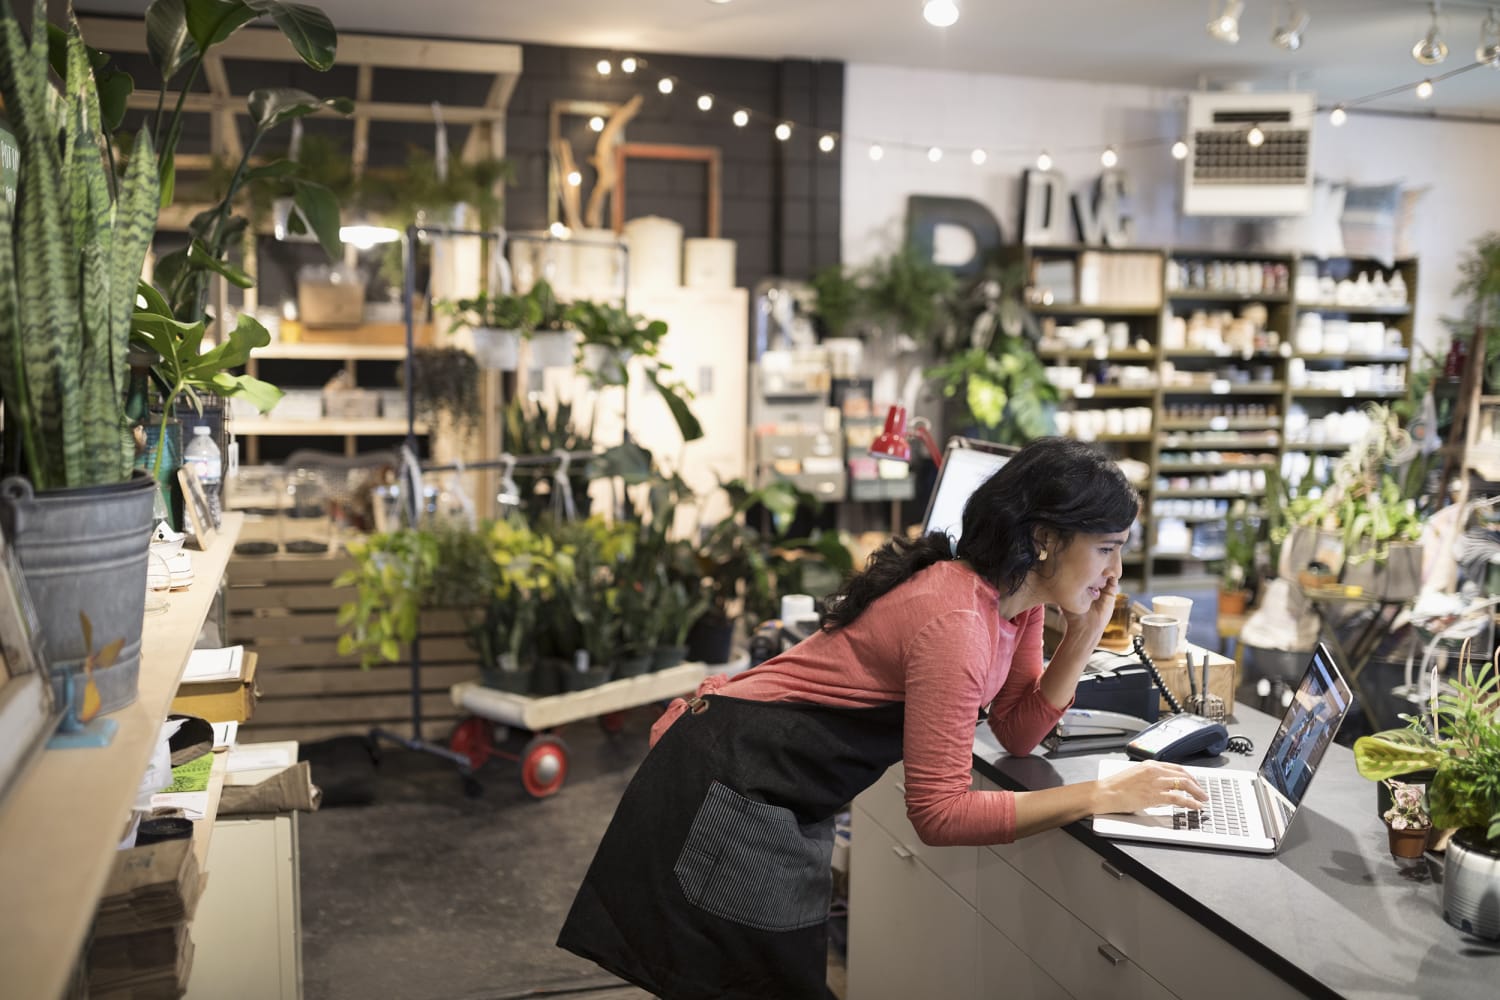 The important insurance policies small business owners are overlooking